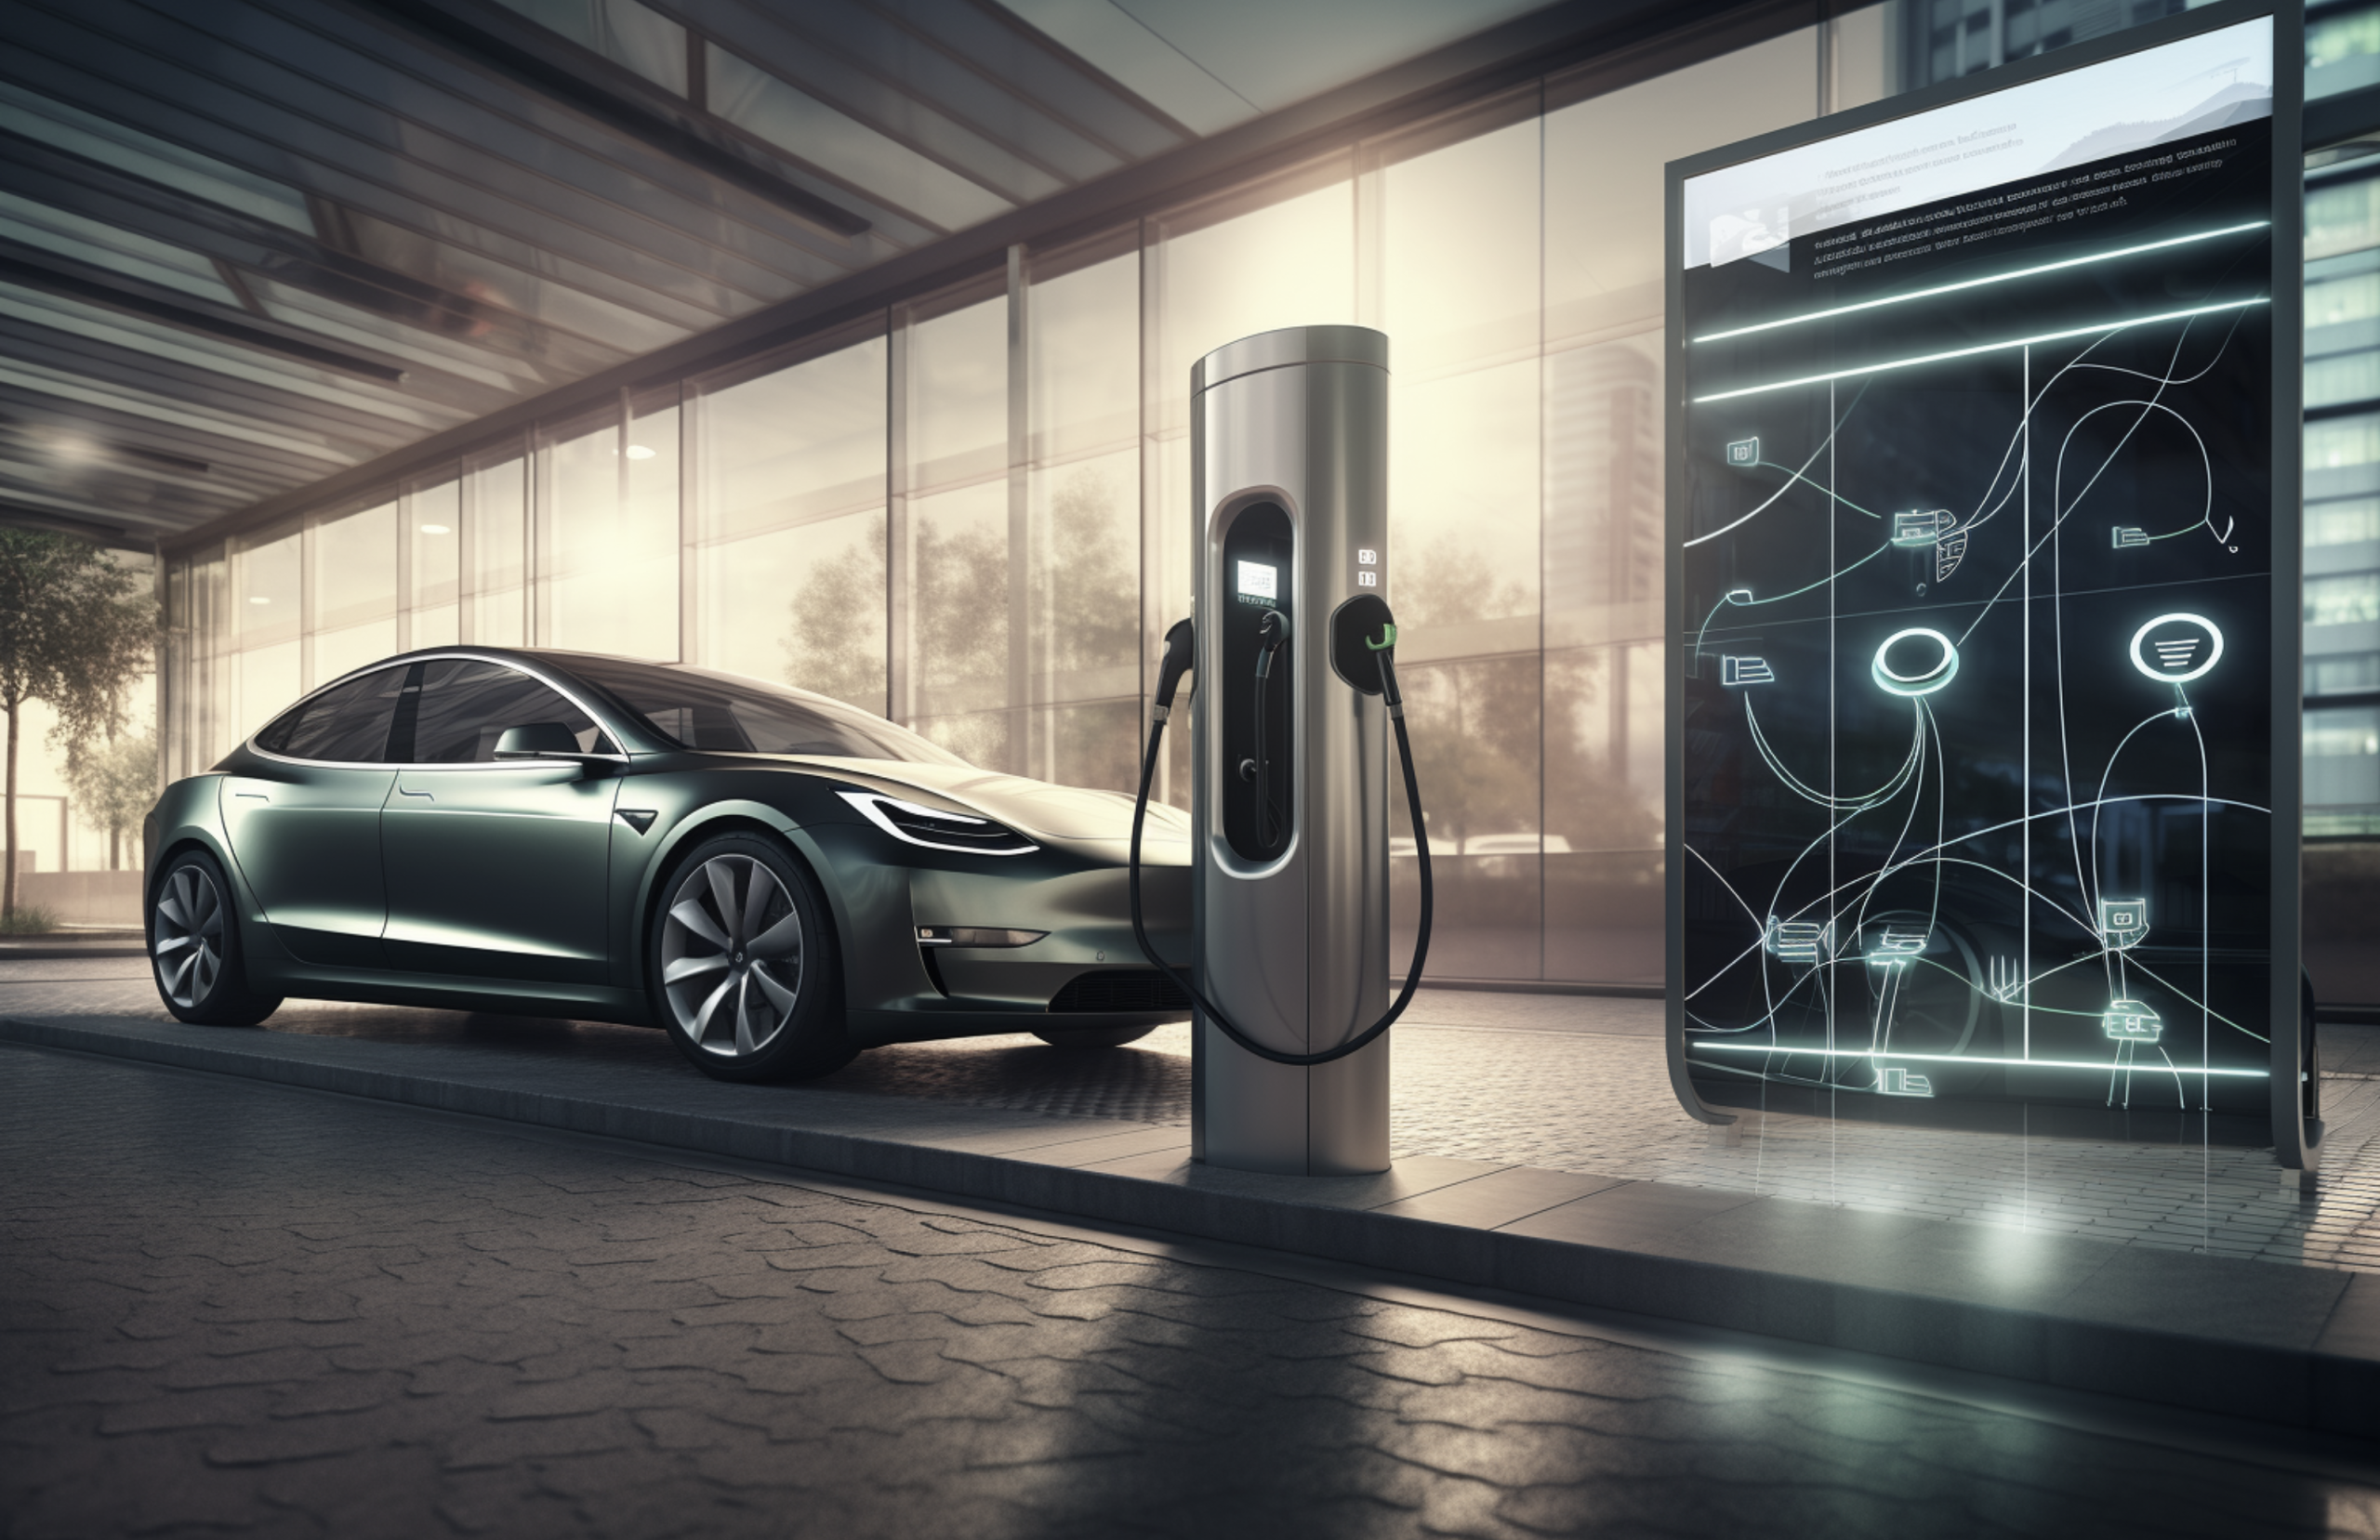 A futuristic Electric vehicle charging station with a massive screen showcasing the charging statistics